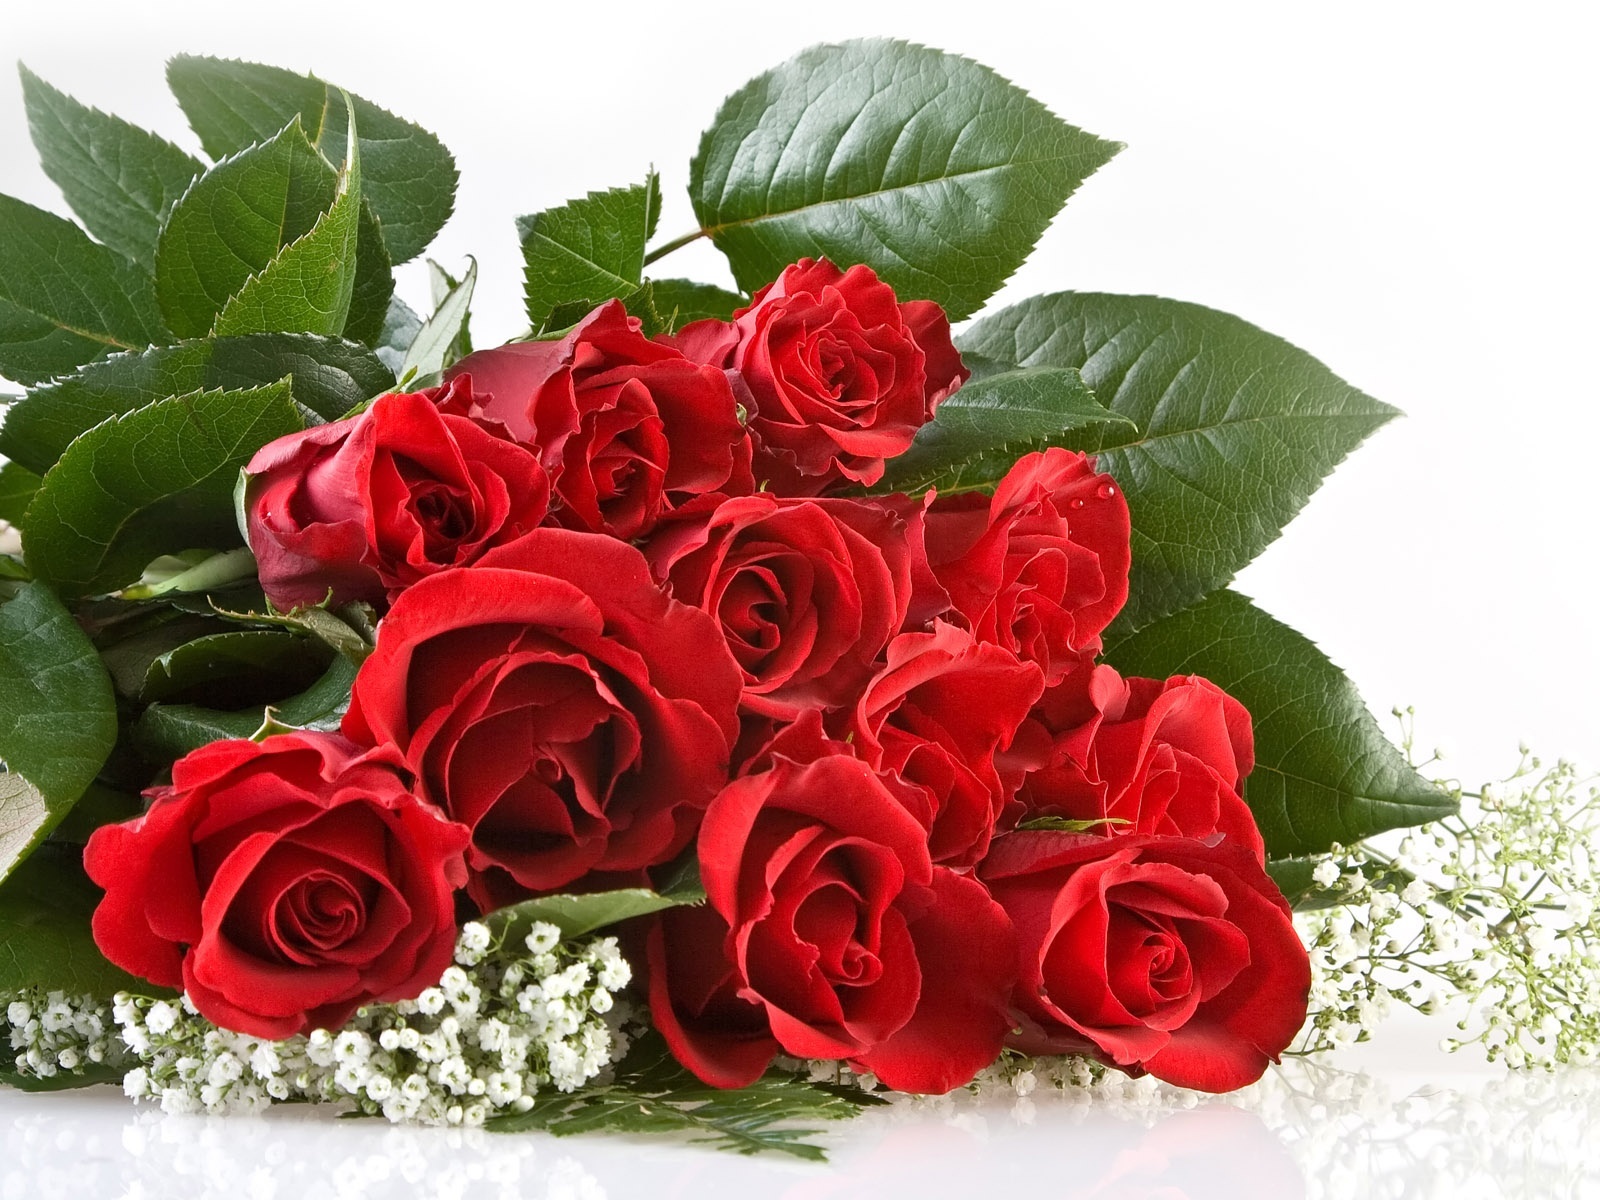 holidays, flowers, roses, plants, bouquets, red